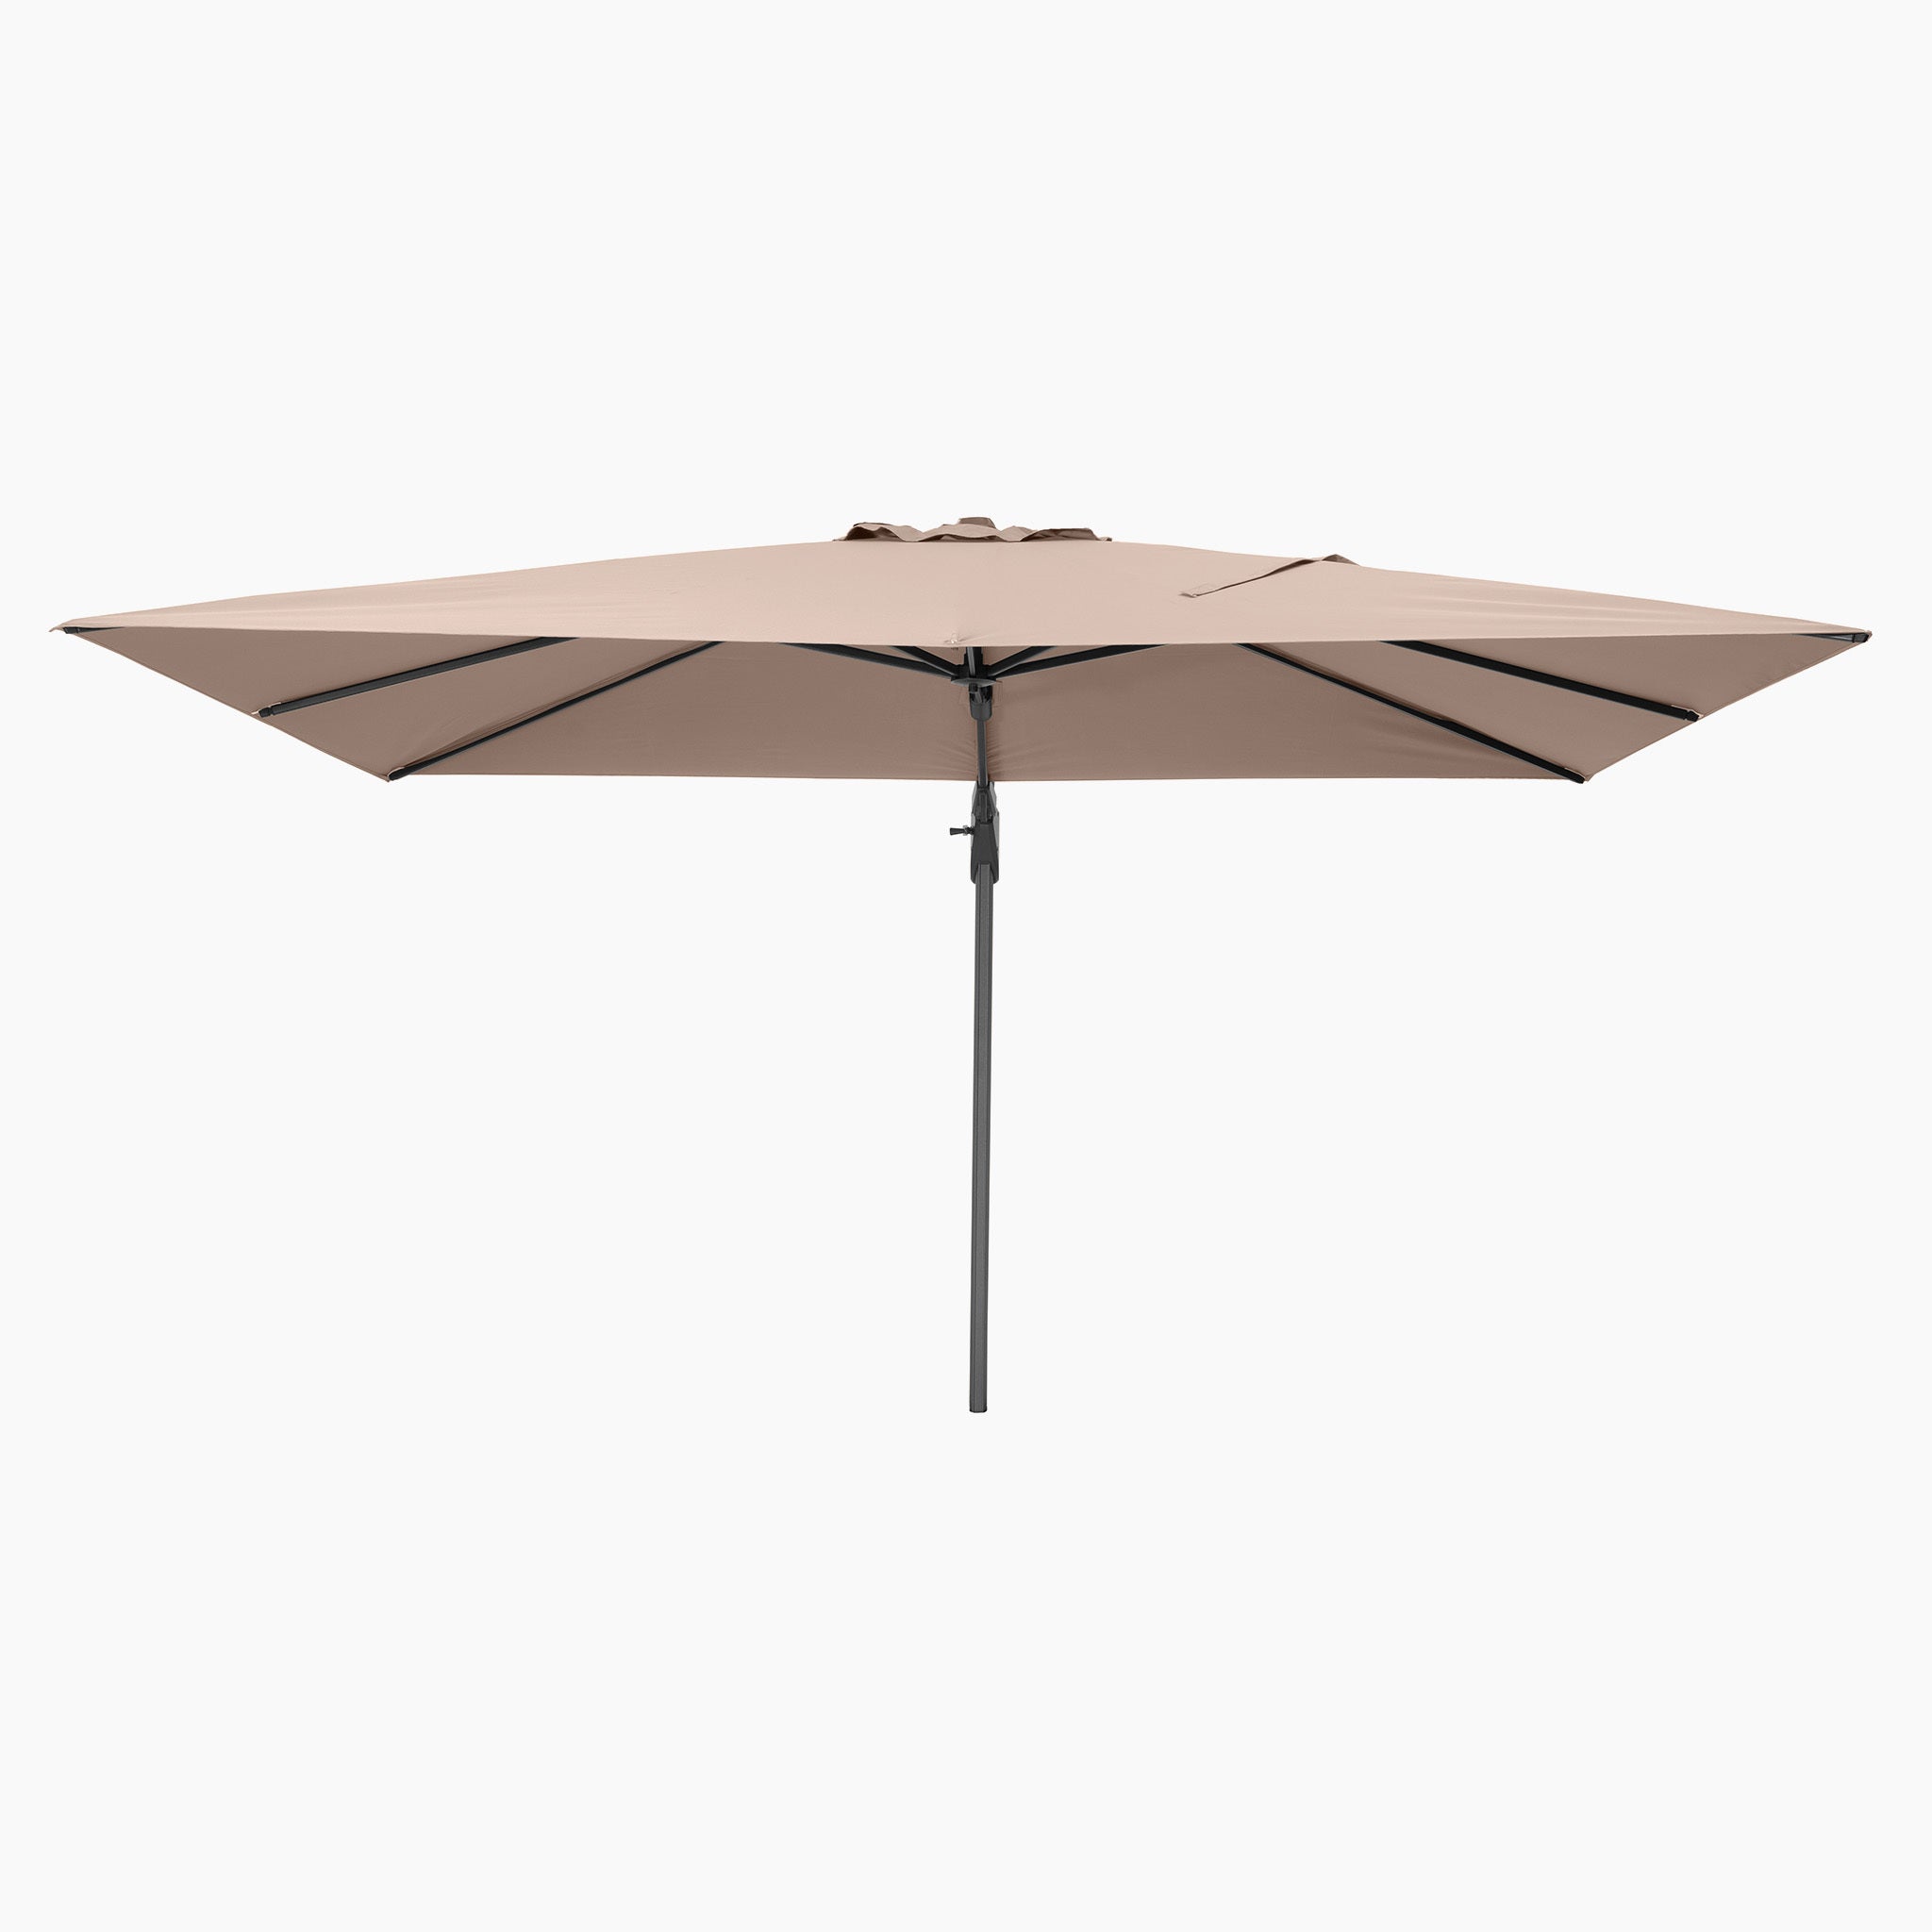 Challenger T2 3.5m x 2.6m Rectangular Cantilever Parasol in Taupe